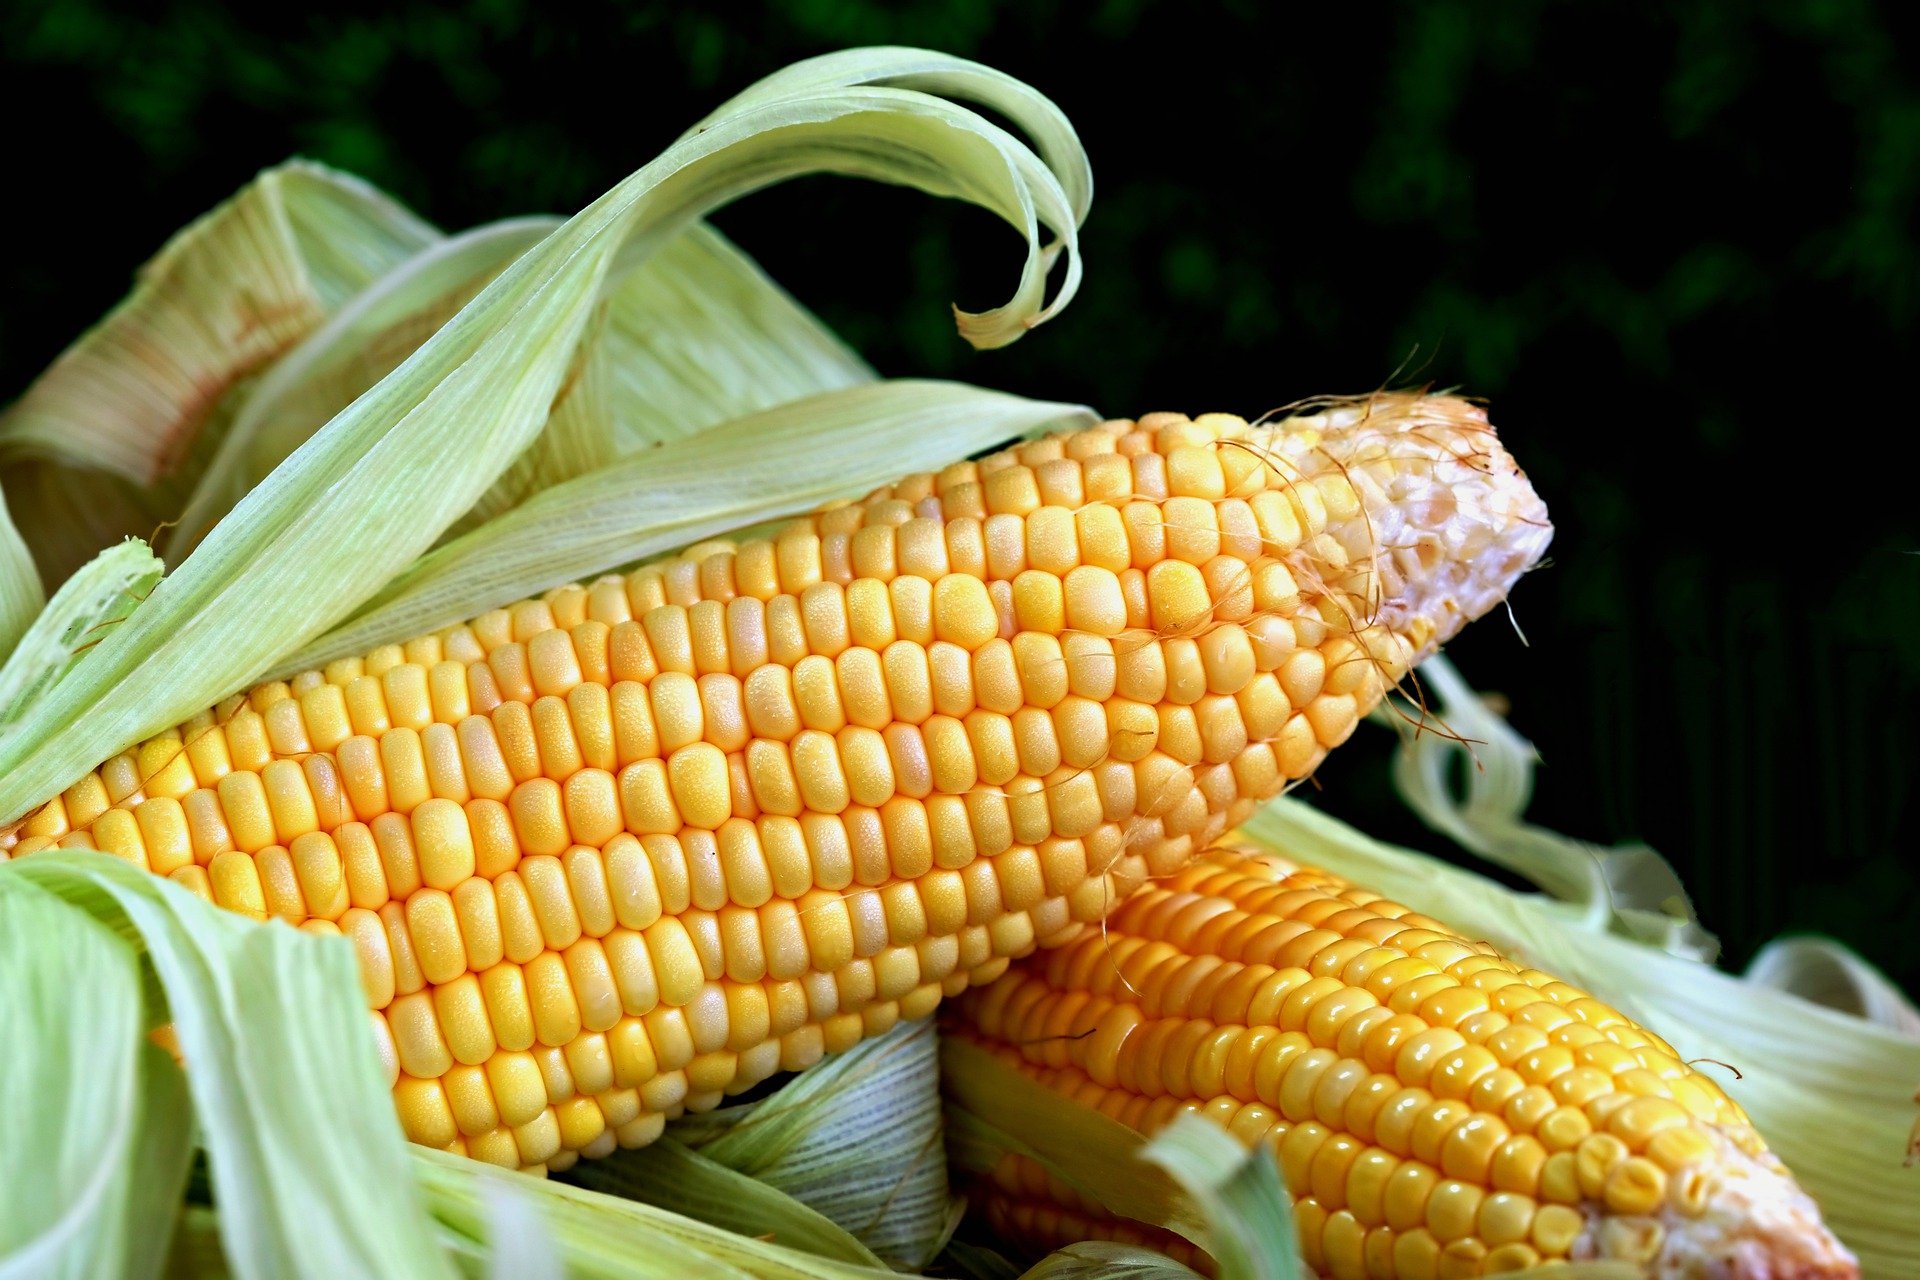 Picture of a cob of corn